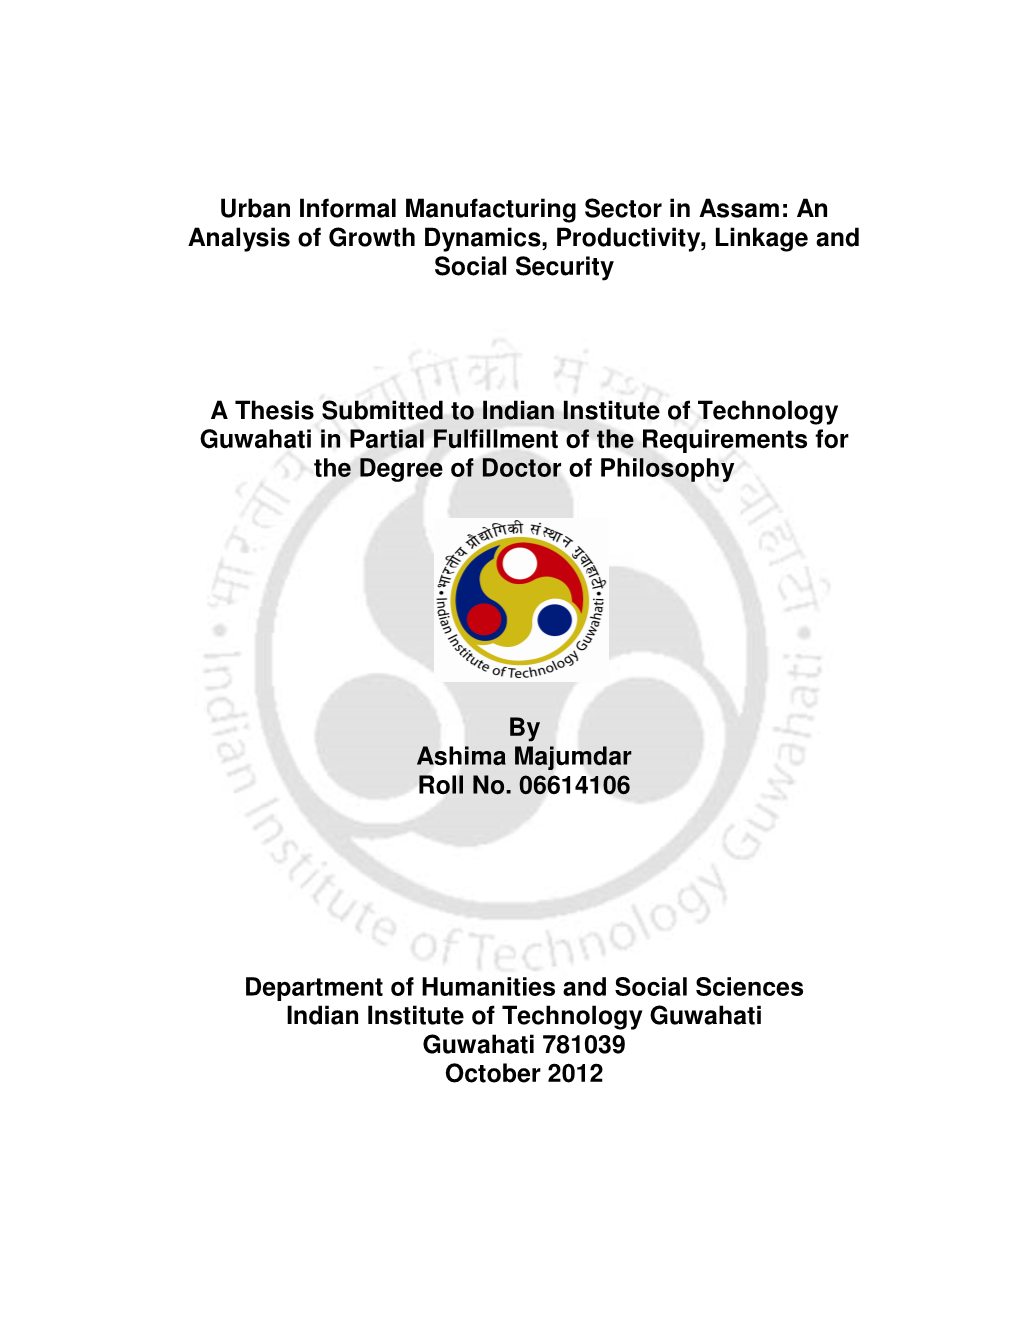 Urban Informal Manufacturing Sector in Assam: an Analysis of Growth Dynamics, Productivity, Linkage and Social Security